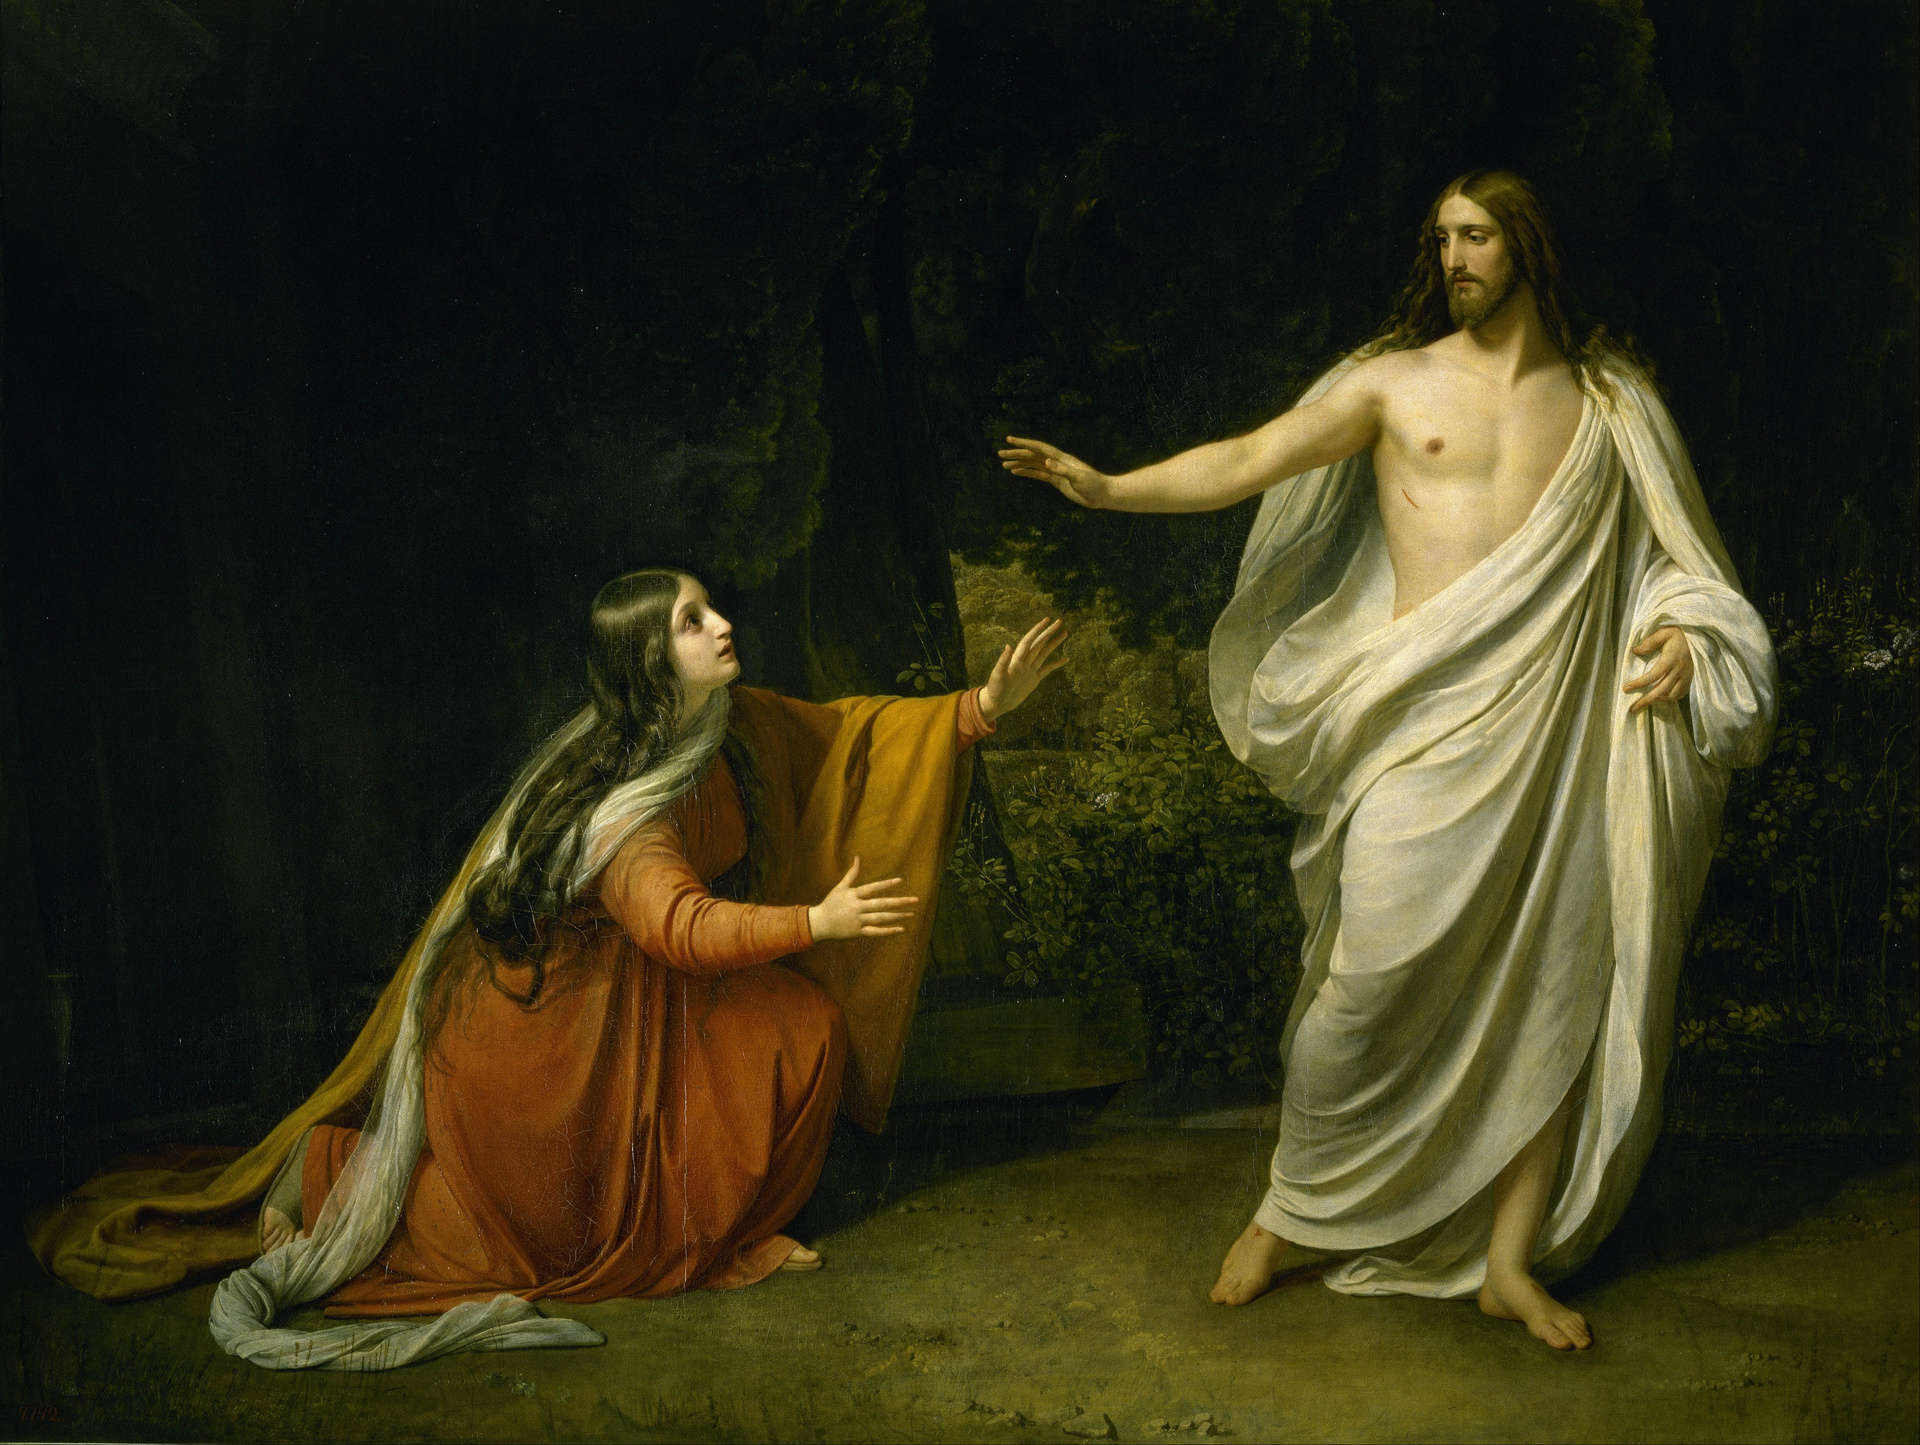 Painting of Jesus and Mary Magdalene